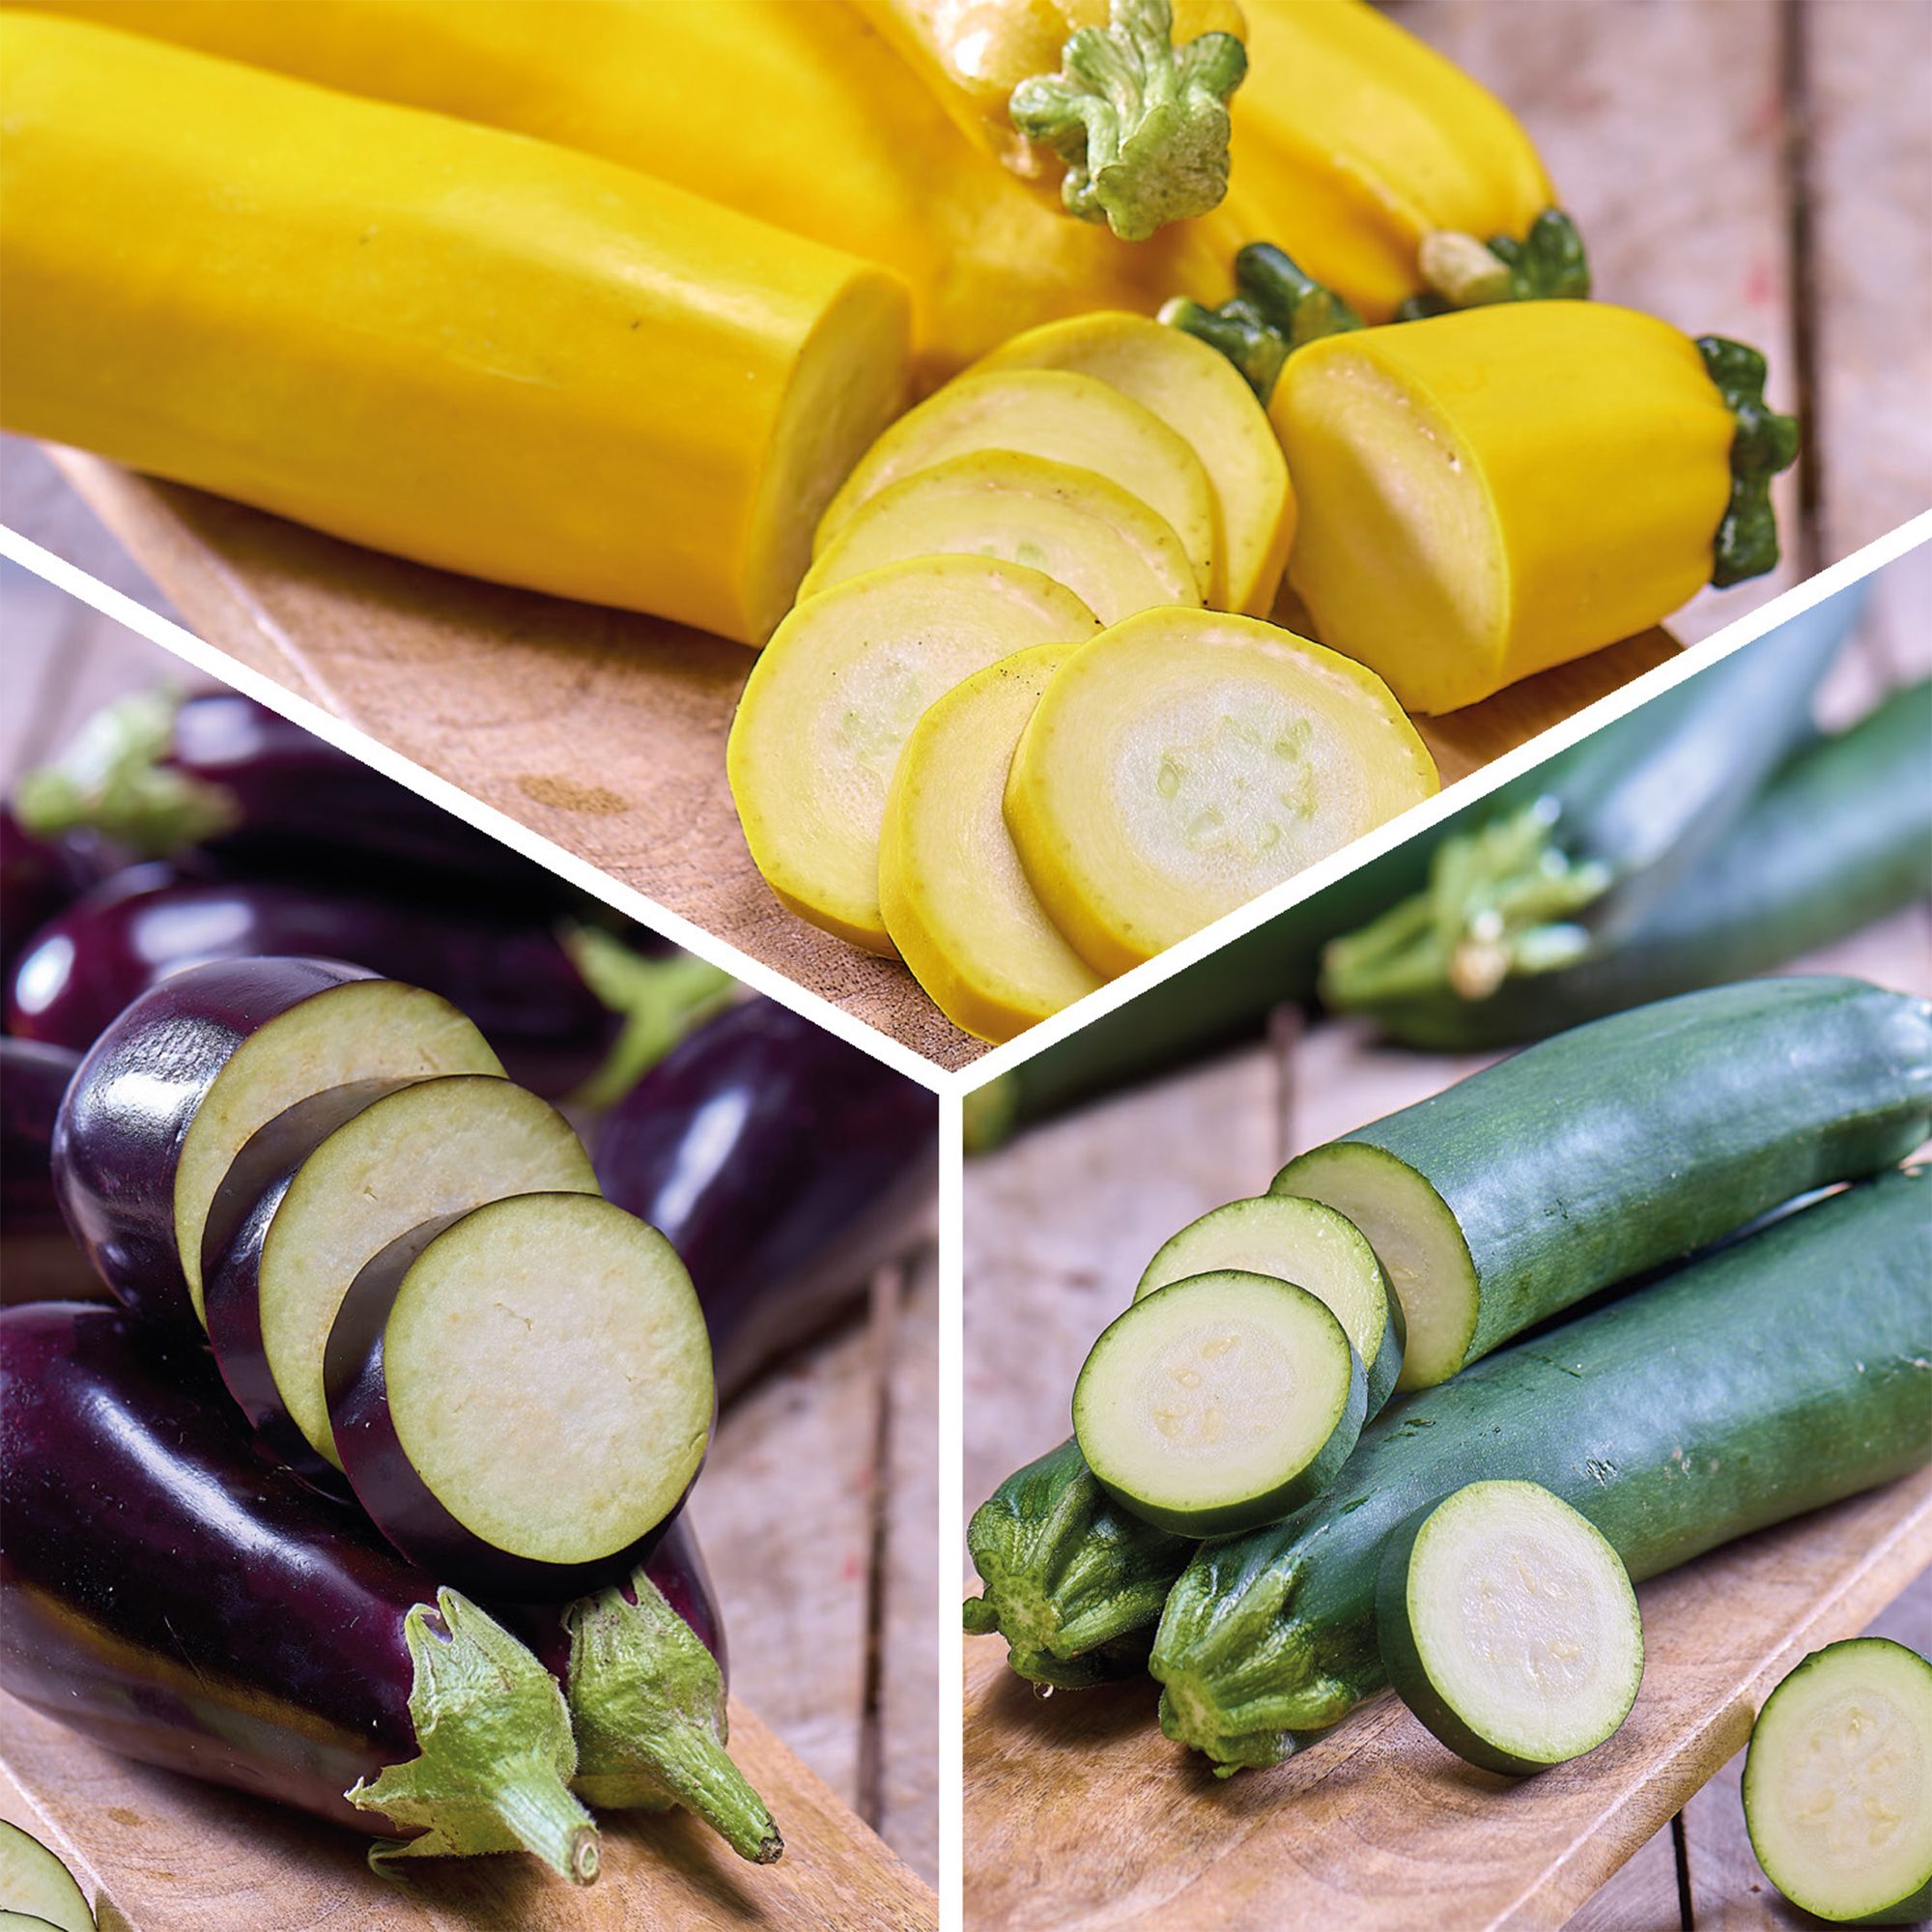 STARTER KIT AUBERGINE AND COURGETTES